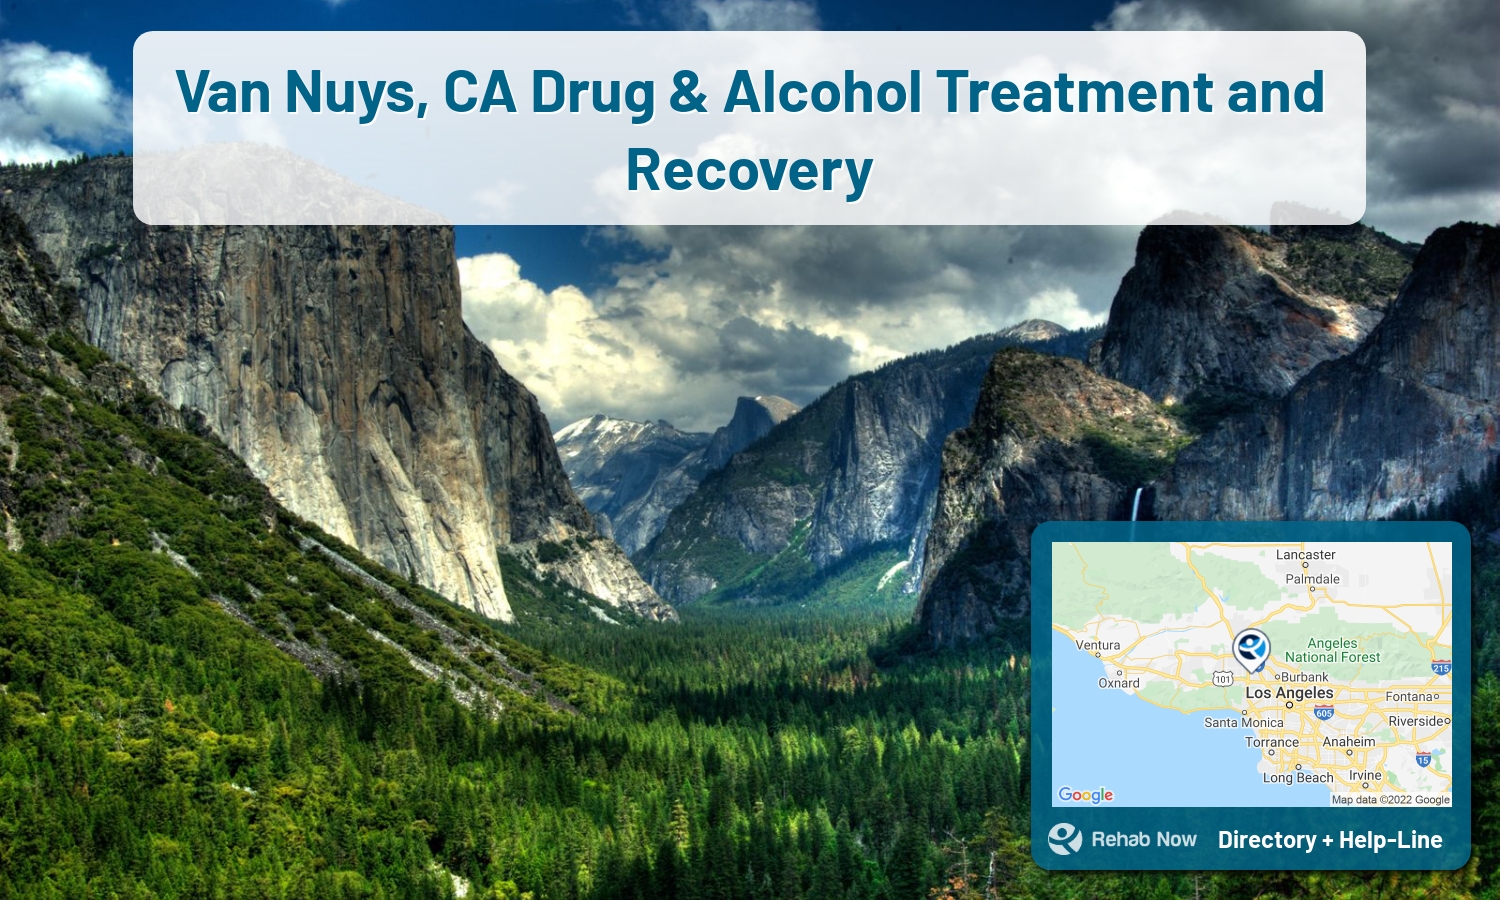 Drug rehab and alcohol treatment services nearby Van Nuys, CA. Need help choosing a treatment program? Call our free hotline!